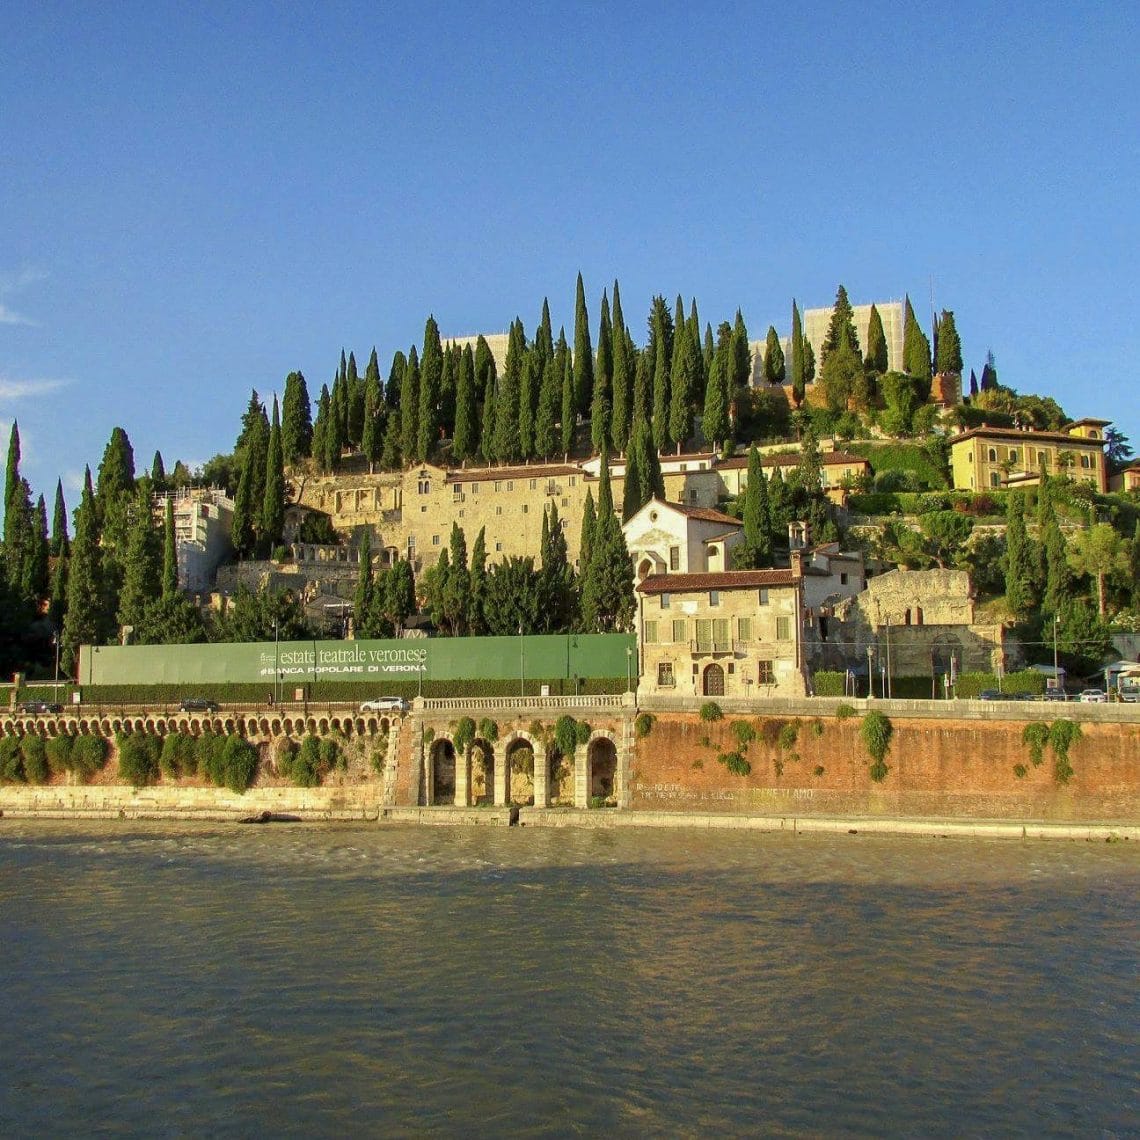 A First Timer’s Guide to Spending One Day in Verona